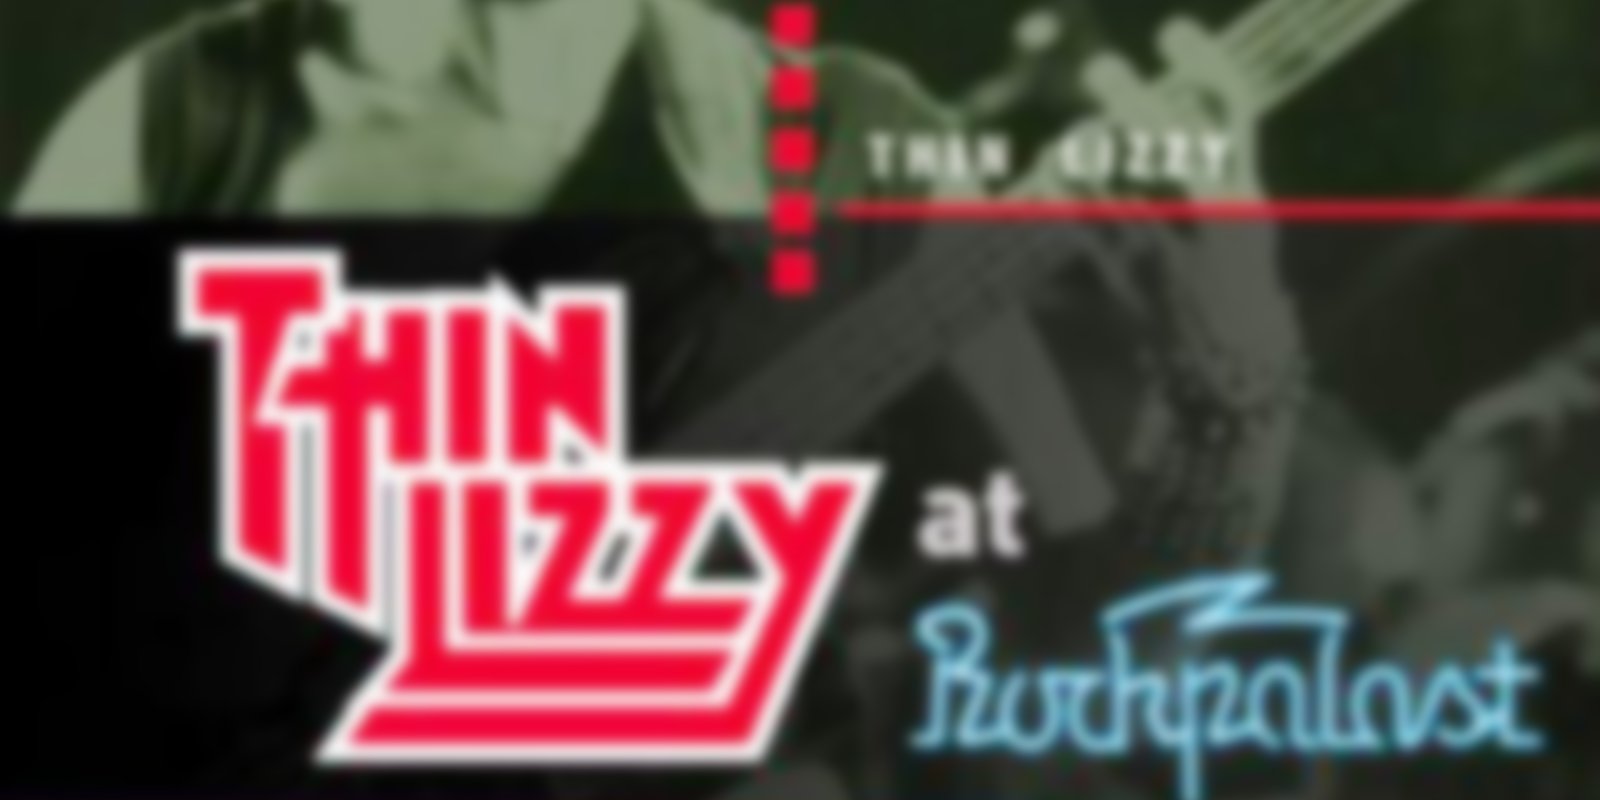 Thin Lizzy - Live at Rockpalast